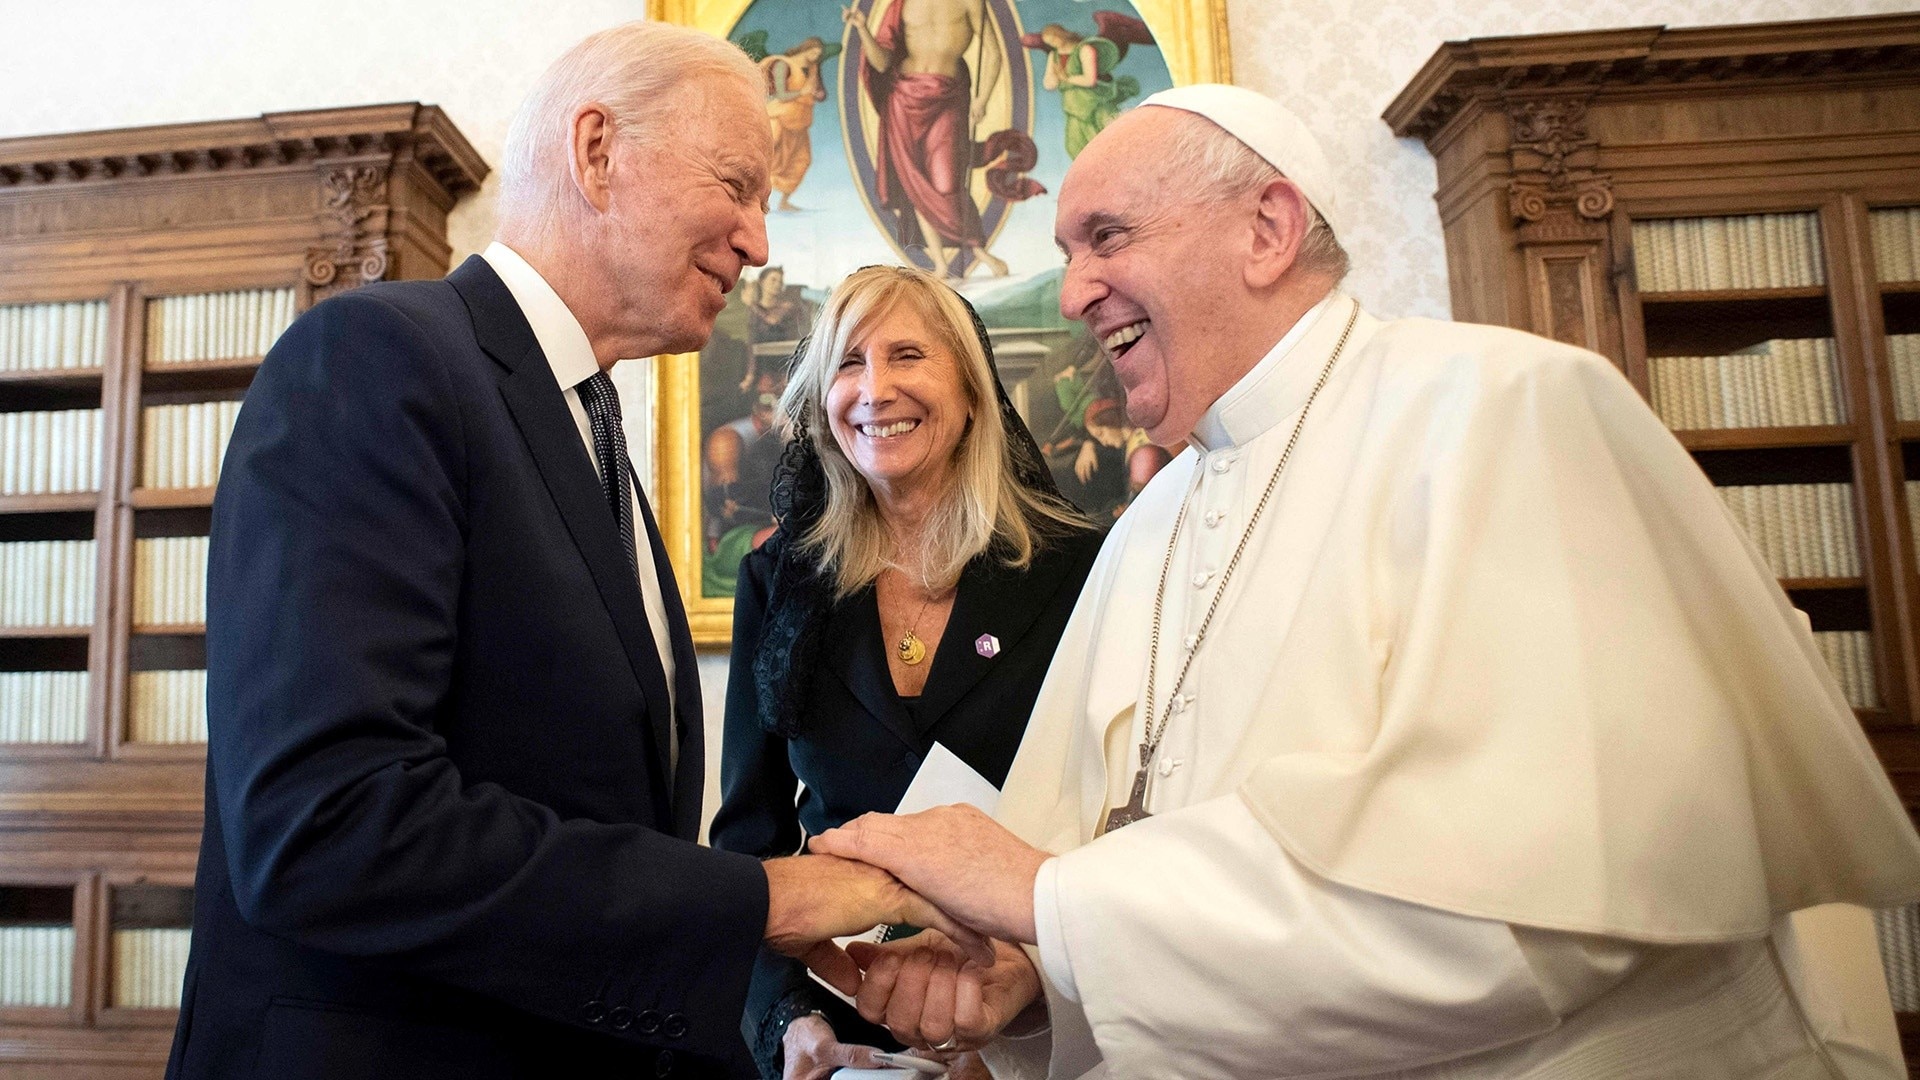 Watch TODAY Excerpt Biden meets with Pope Francis as G20 summit kicks